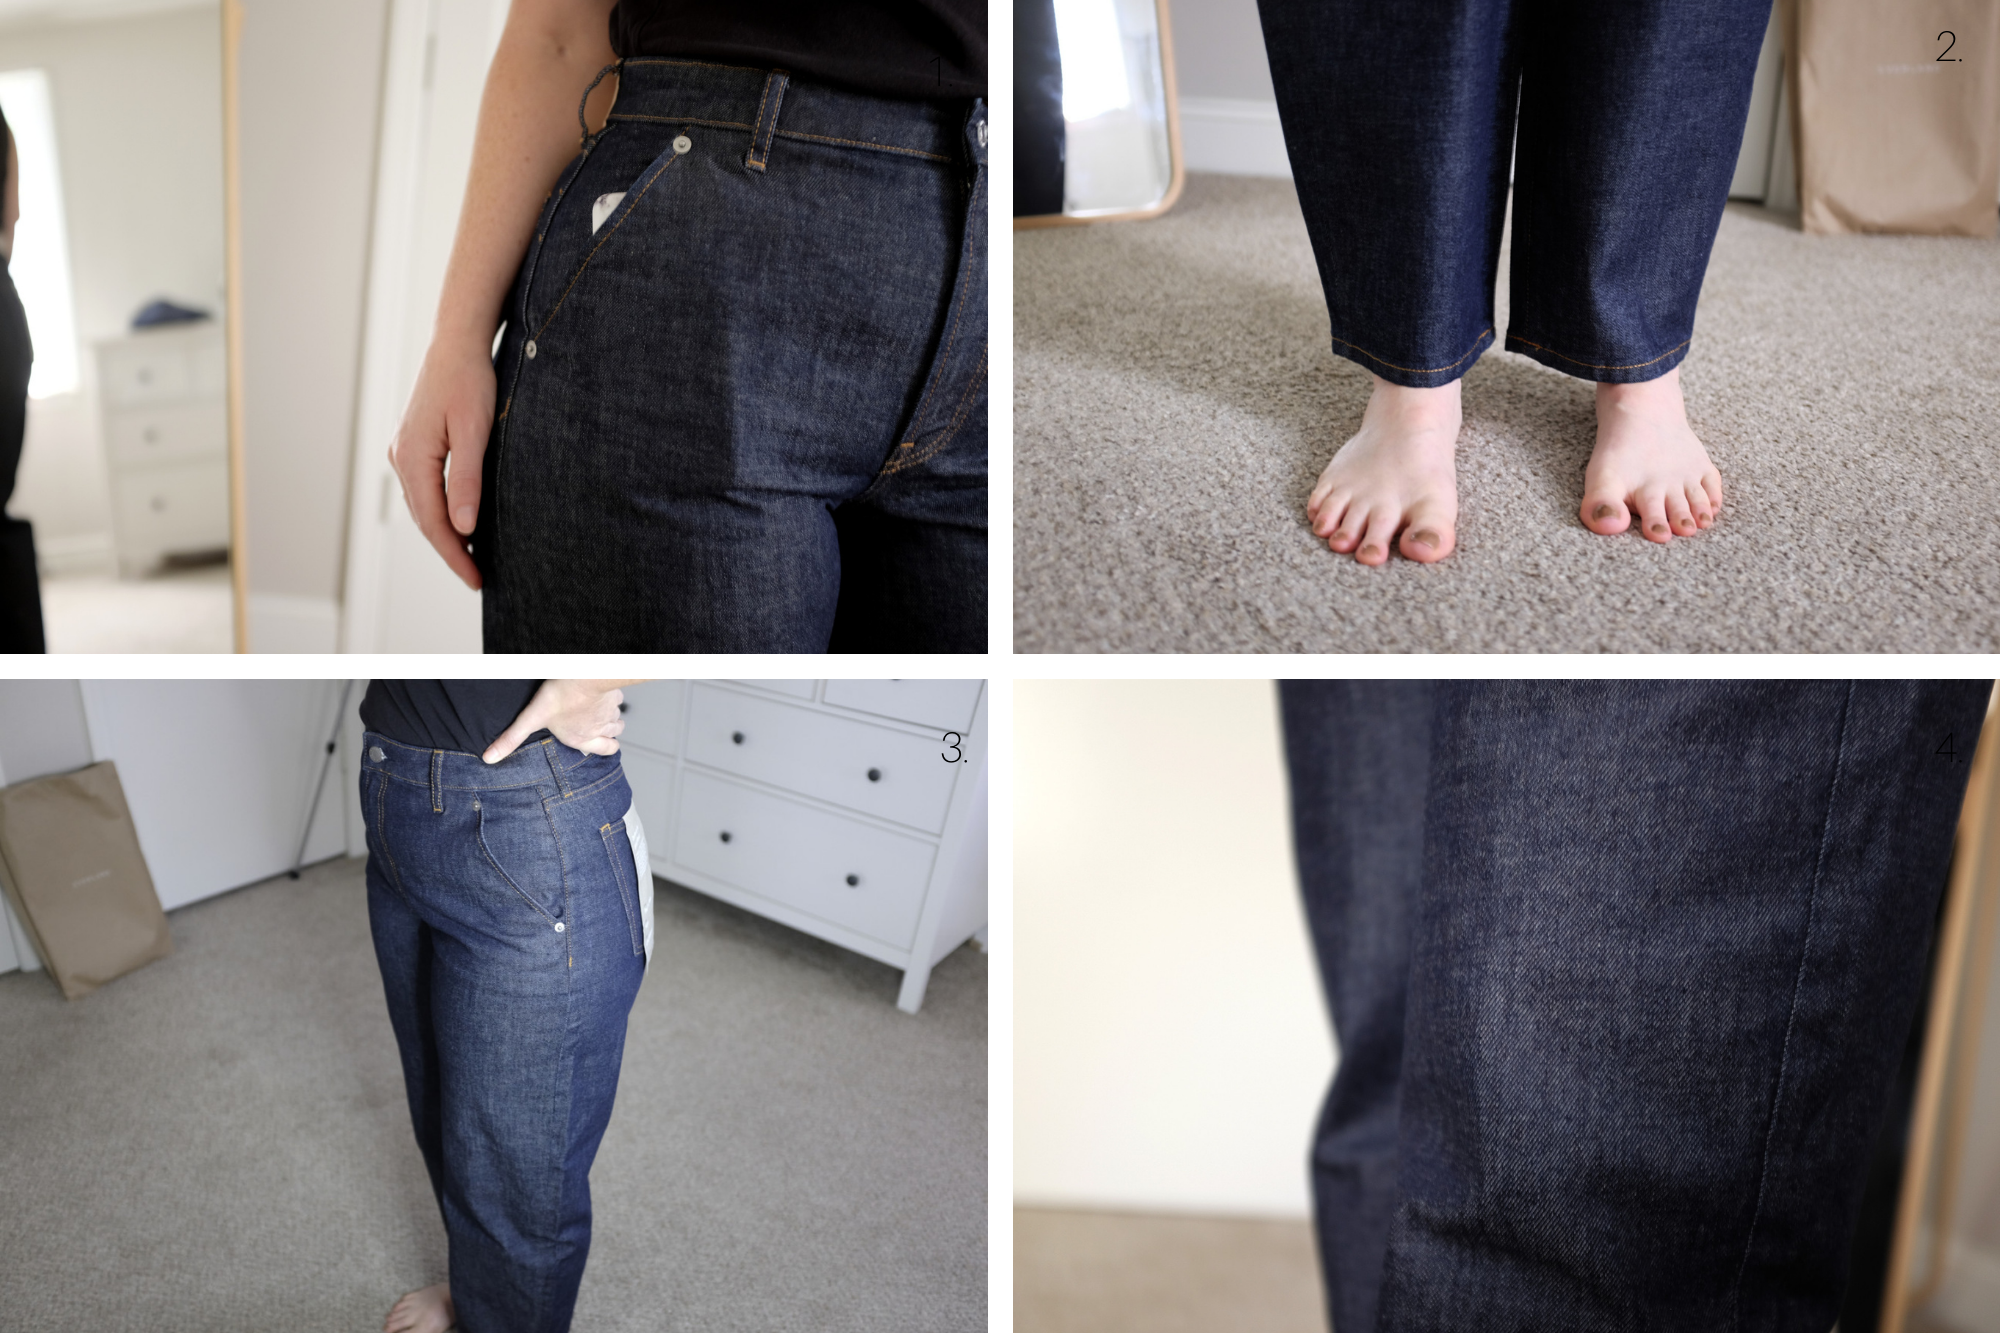 Collage of four photos; clockwise from top left: a close up of a phone in a jean pocket, a pair of feet and denim grazing the bottom of the ankles, a pair of knees wearing jeans, and a waist-down shot of Alyssa wearing jeans with the tags still on.